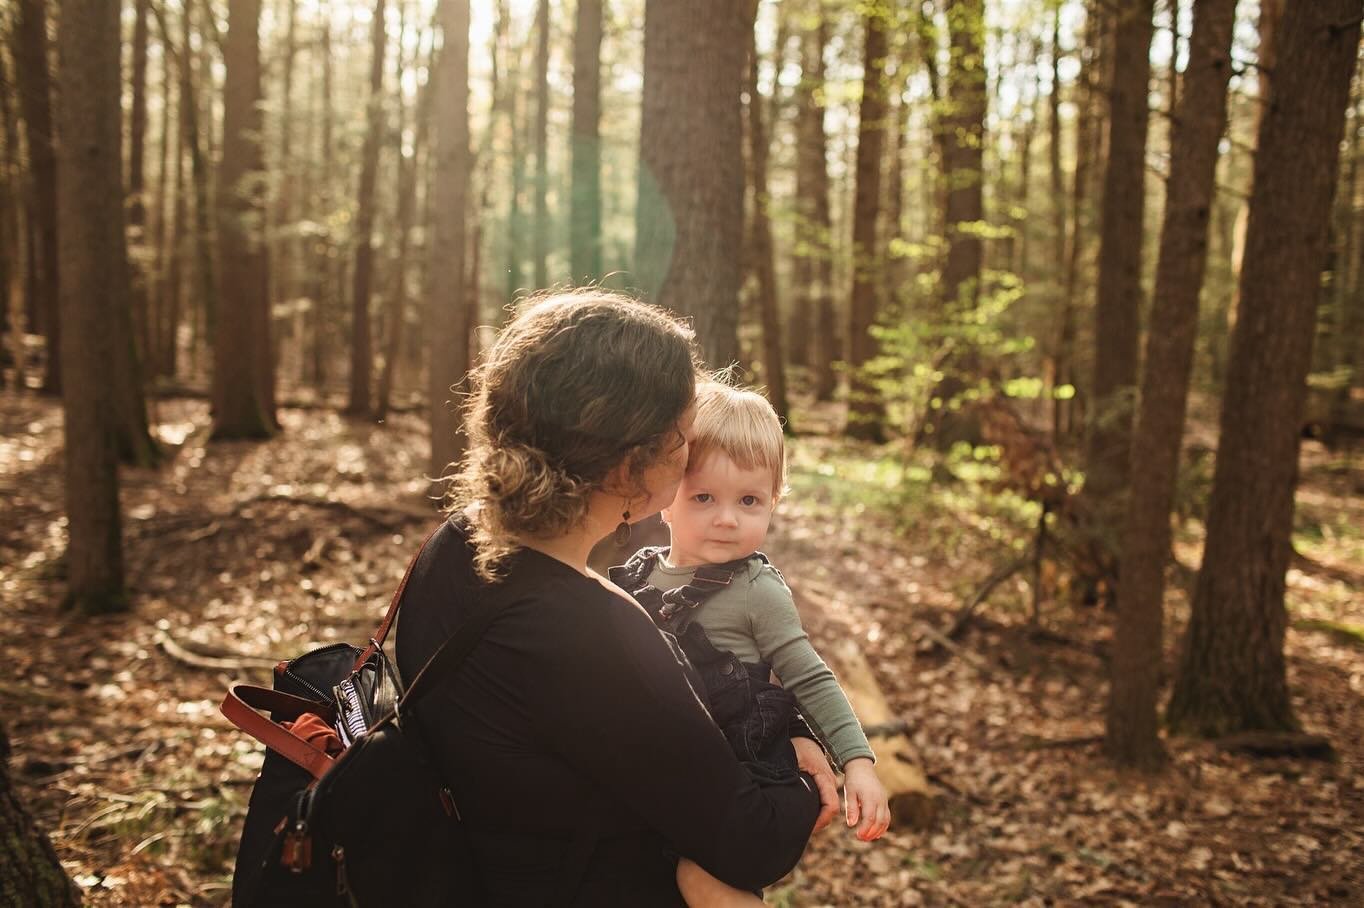 I can&rsquo;t hold on to these sneak peeks any longer! Here&rsquo;s the first batch from my session with Jess and her son last week. I had SUCH a fun time with these two. I love their love of the woods. 💚✨

#emilylordphoto #newhampshire #motherson #